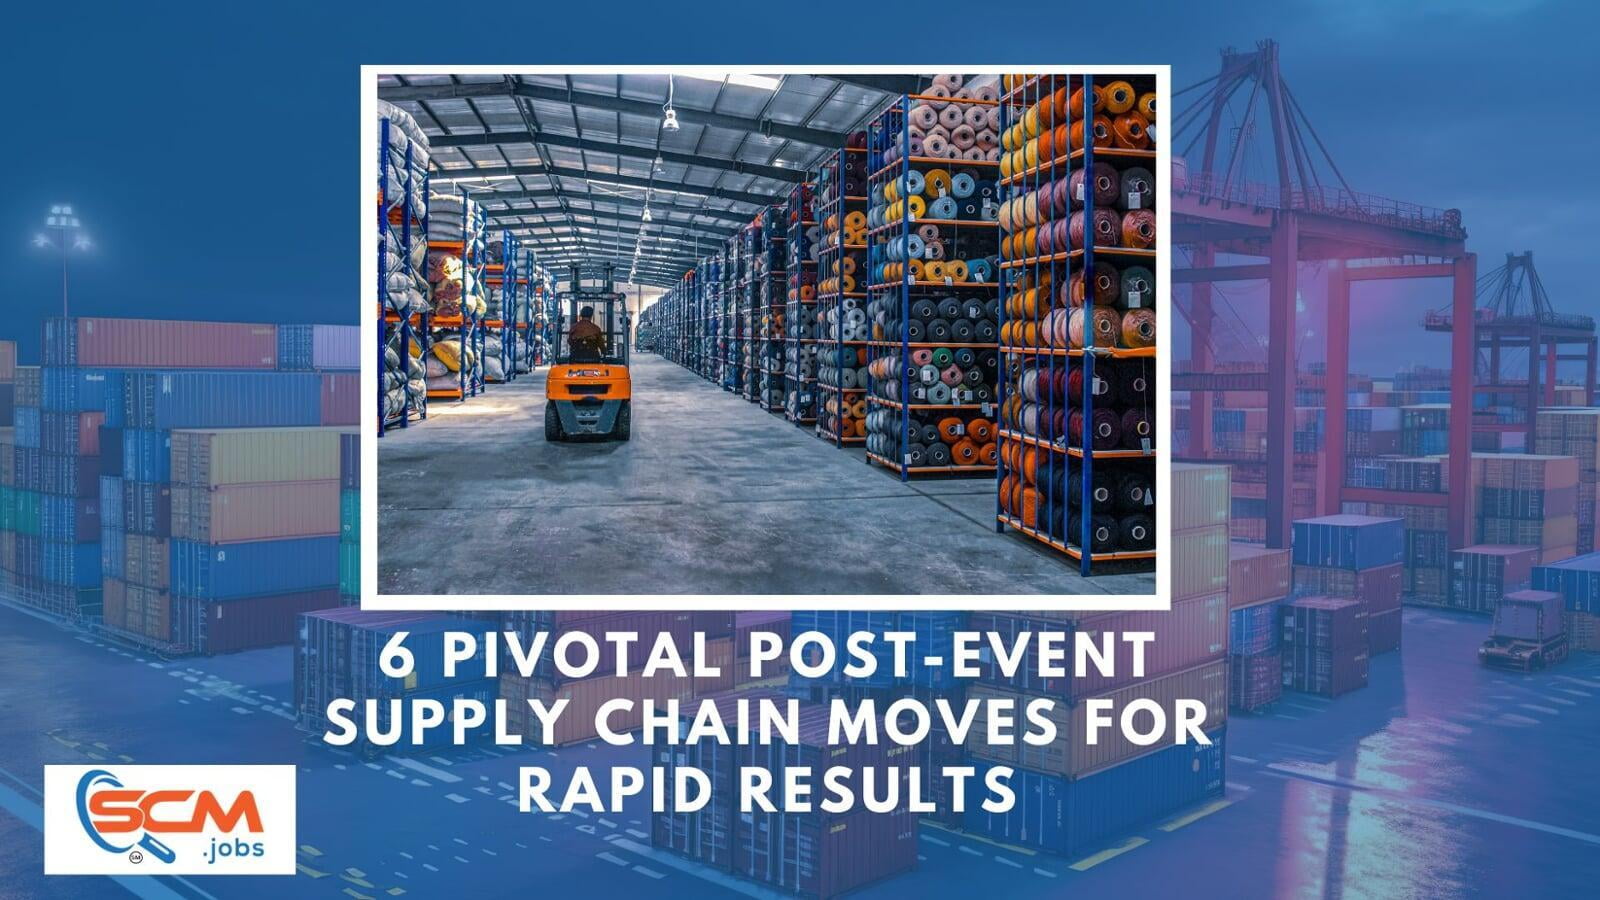 6 Pivotal Post-Event Supply Chain Moves for Rapid Results